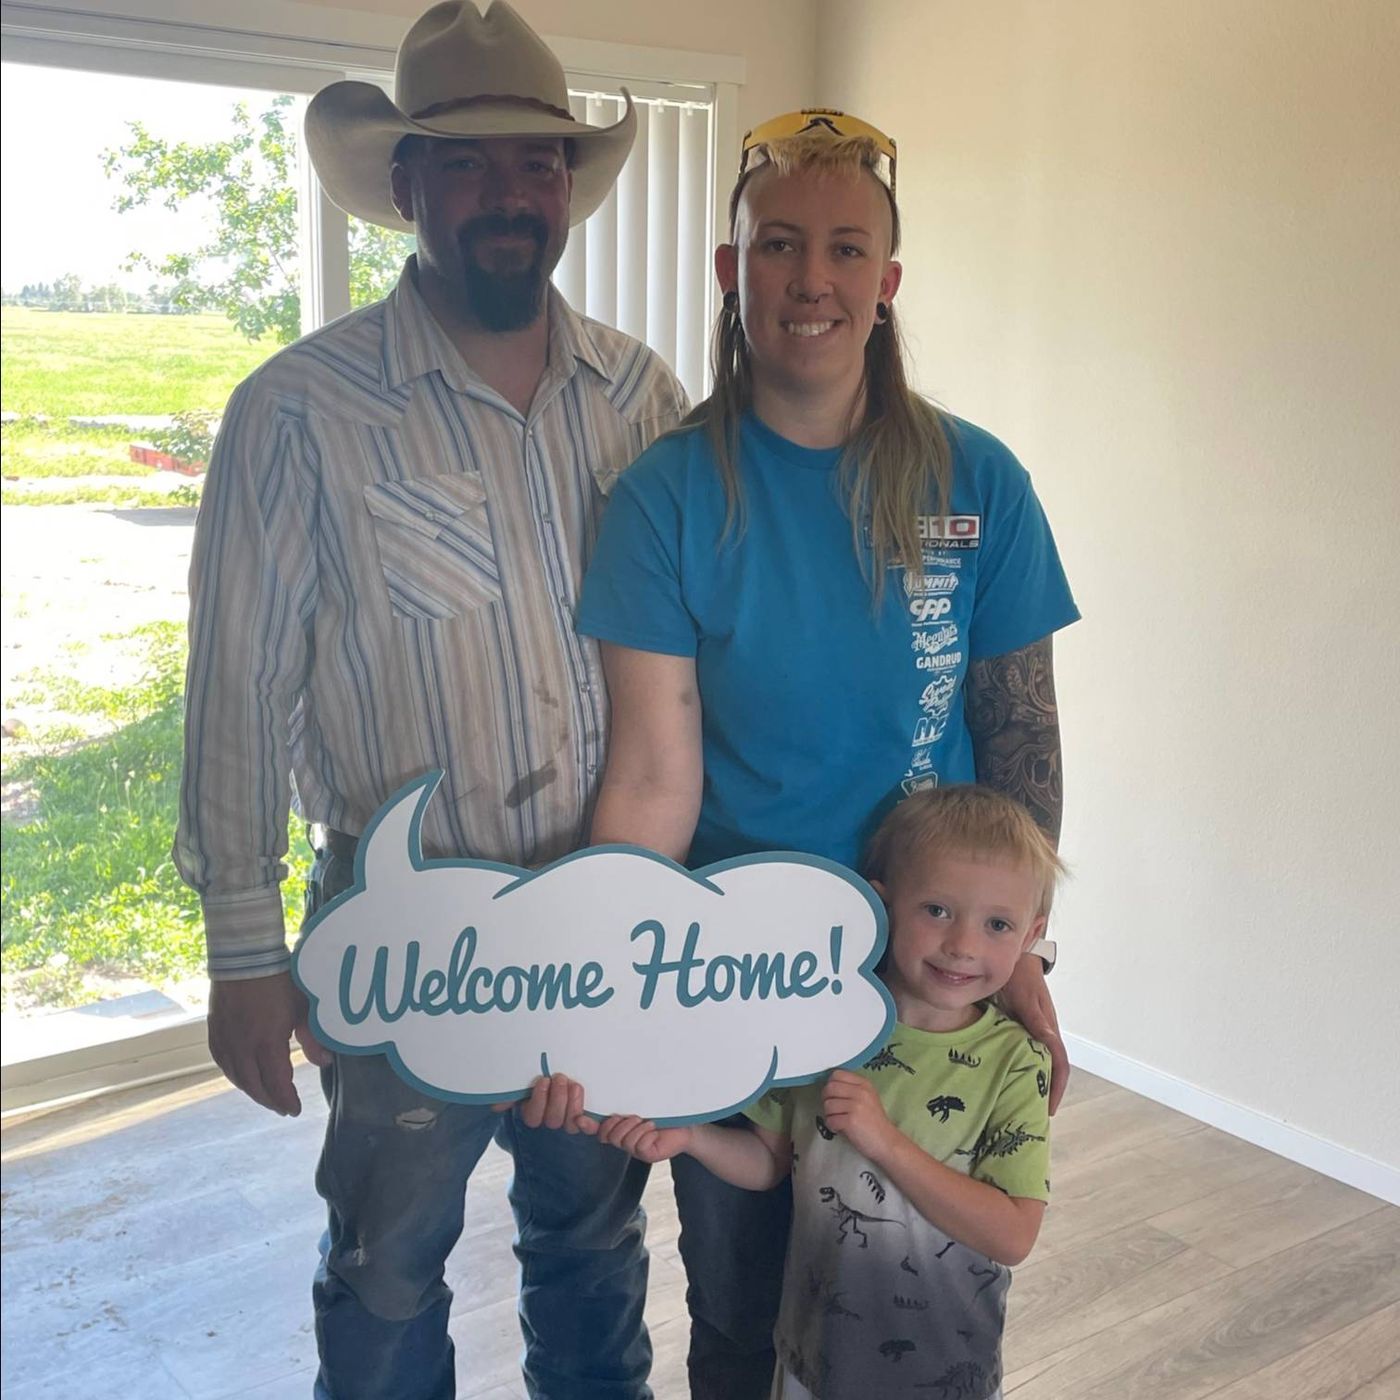 Justin C. welcome home image